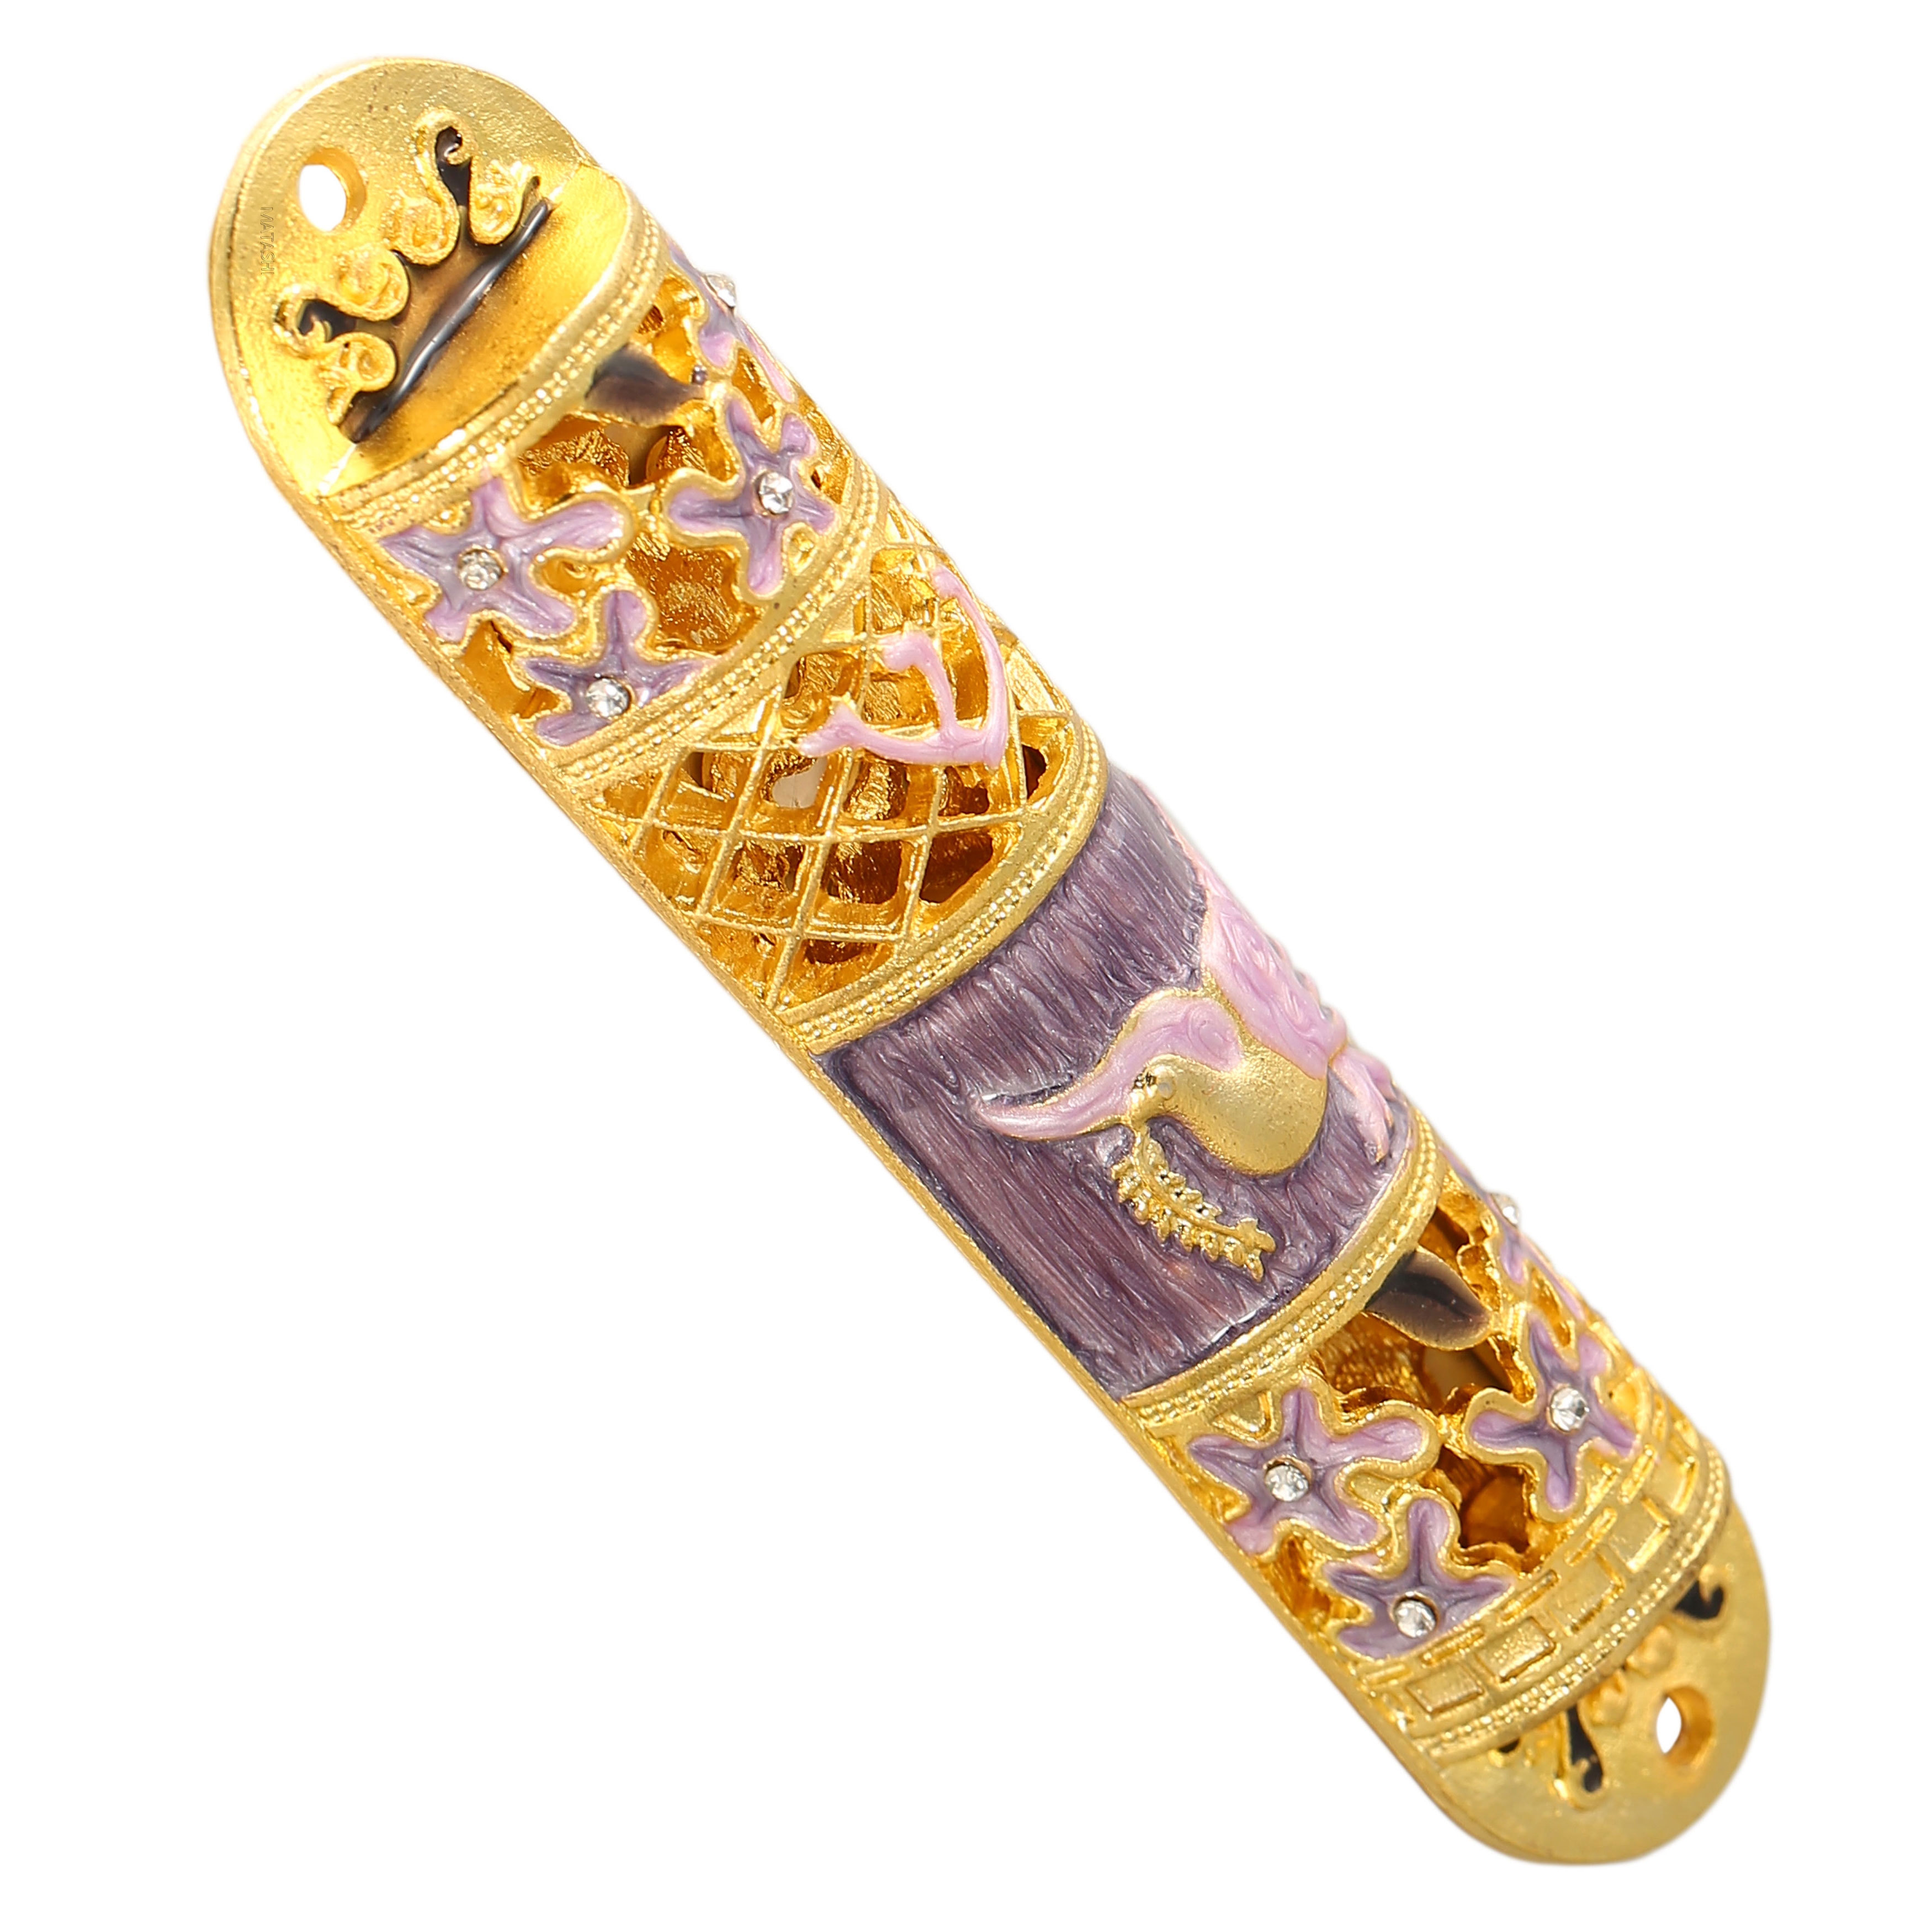 Hand Painted Enamel Mezuzah Embellished With A Floral Design With Gold Accents And High Quality Crystals By Matashi